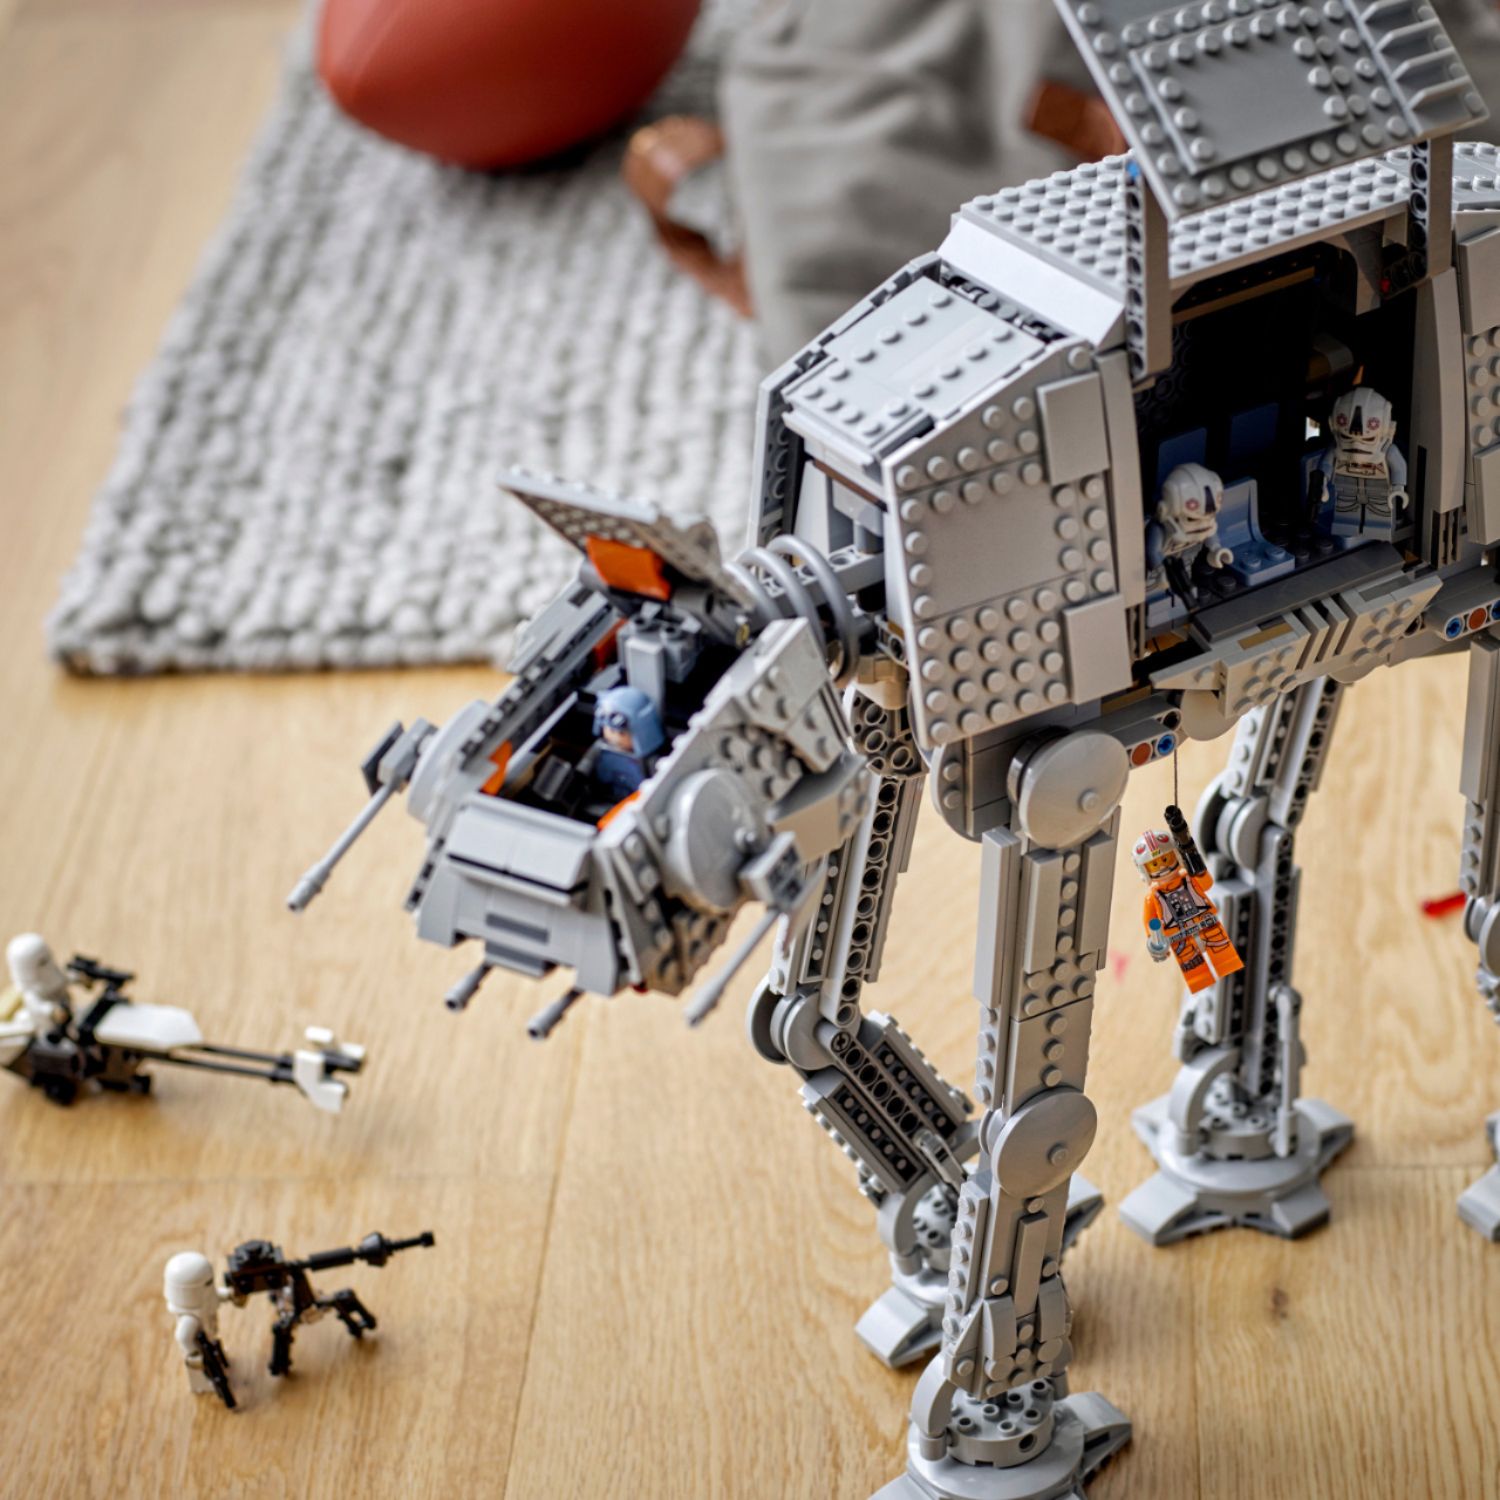 LEGO Star Wars AT-AT 75288 6289034 - Best Buy